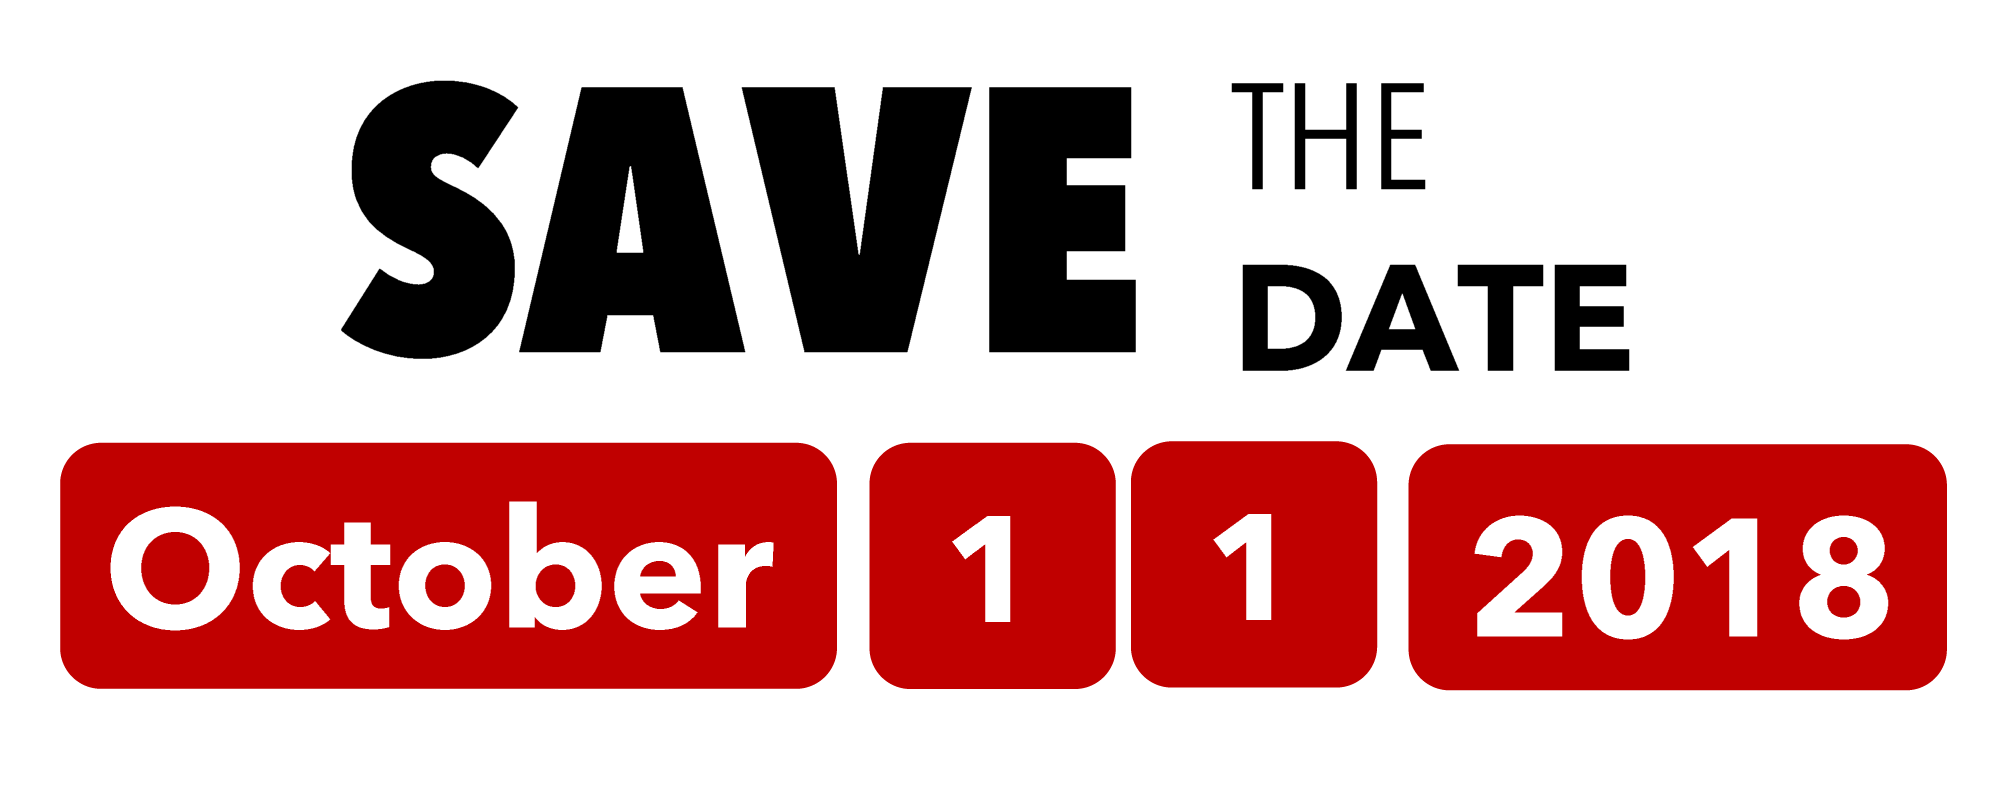 Date Logo - Save the Date AGM North East Training Board